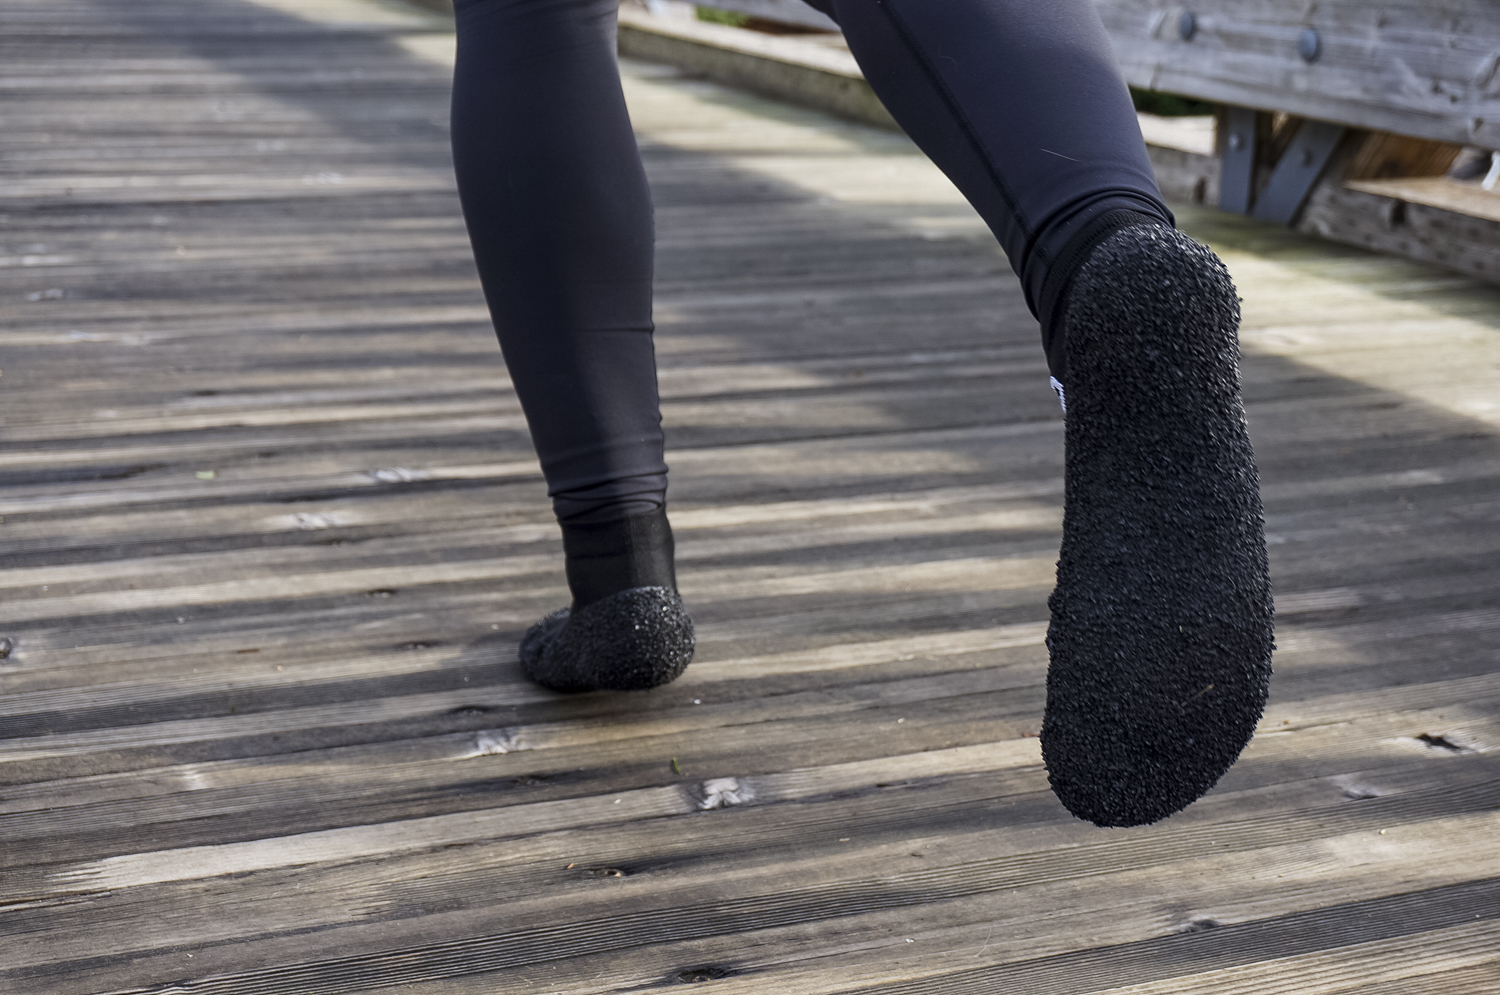 Cut resistant outdoor socks from aliexpress. The feel is really close to  being barefoot just without the worry of stepping onto sharp objects and  getting cuts. : r/BarefootRunning